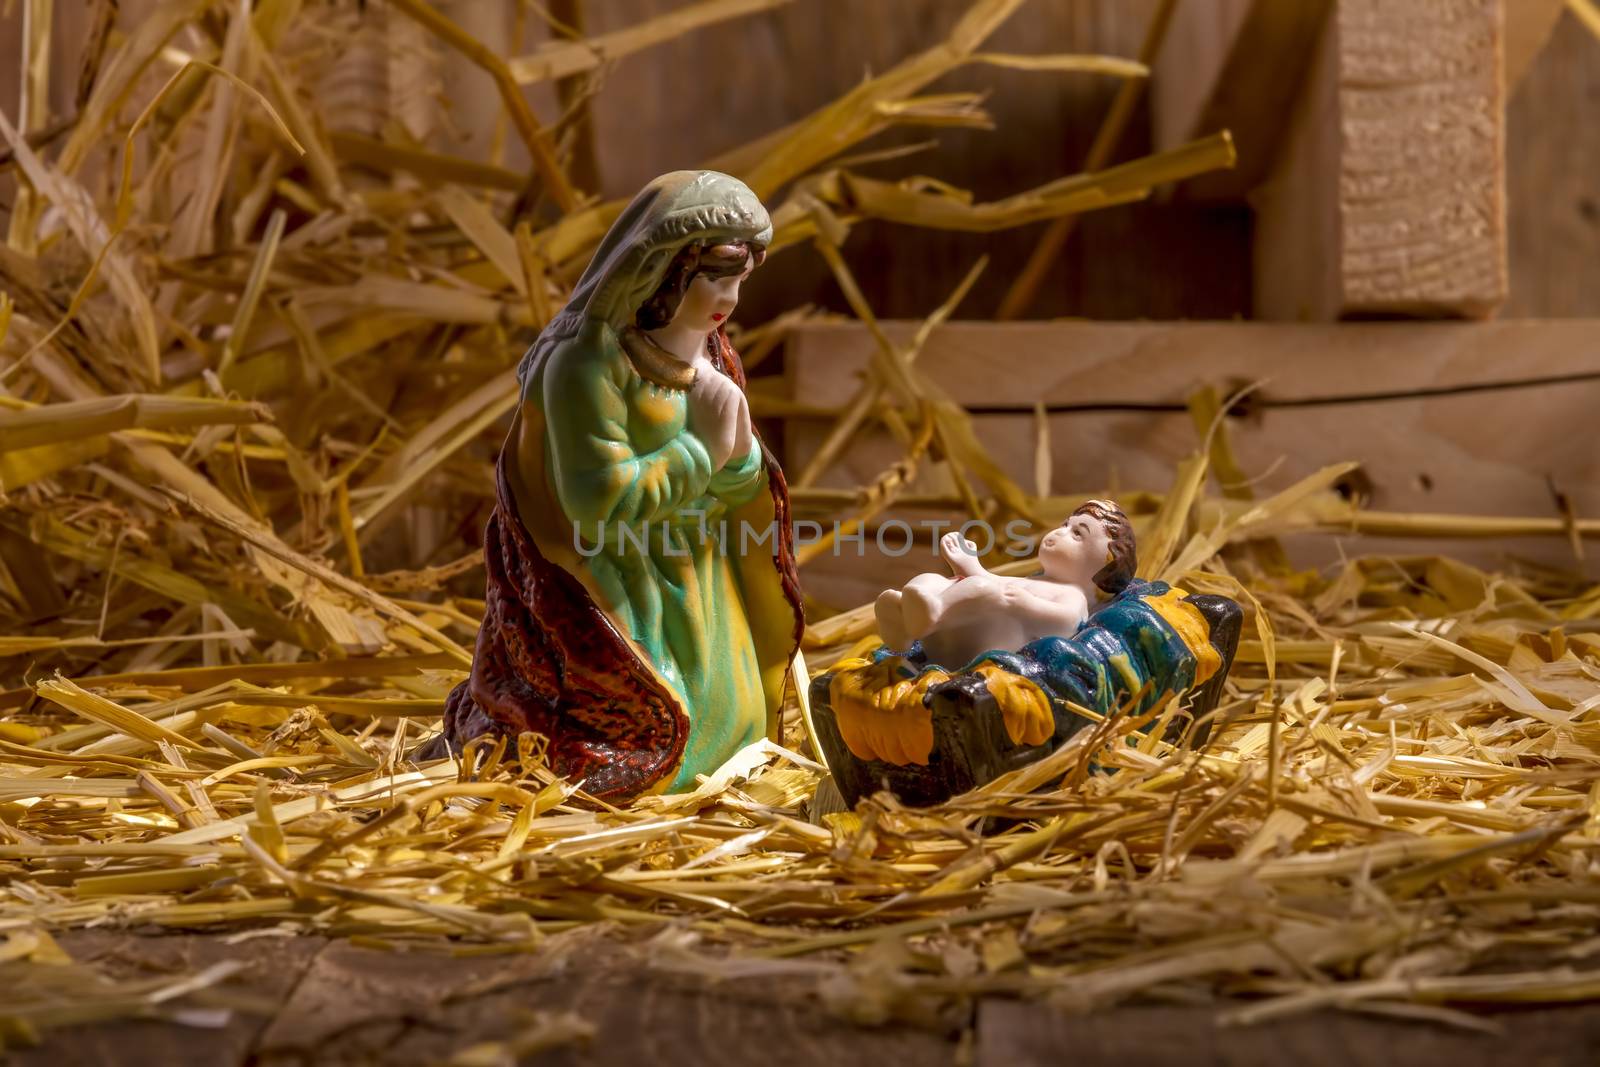 Christmas Manger scene with figurines including Jesus and Mary. Focus on Mary!